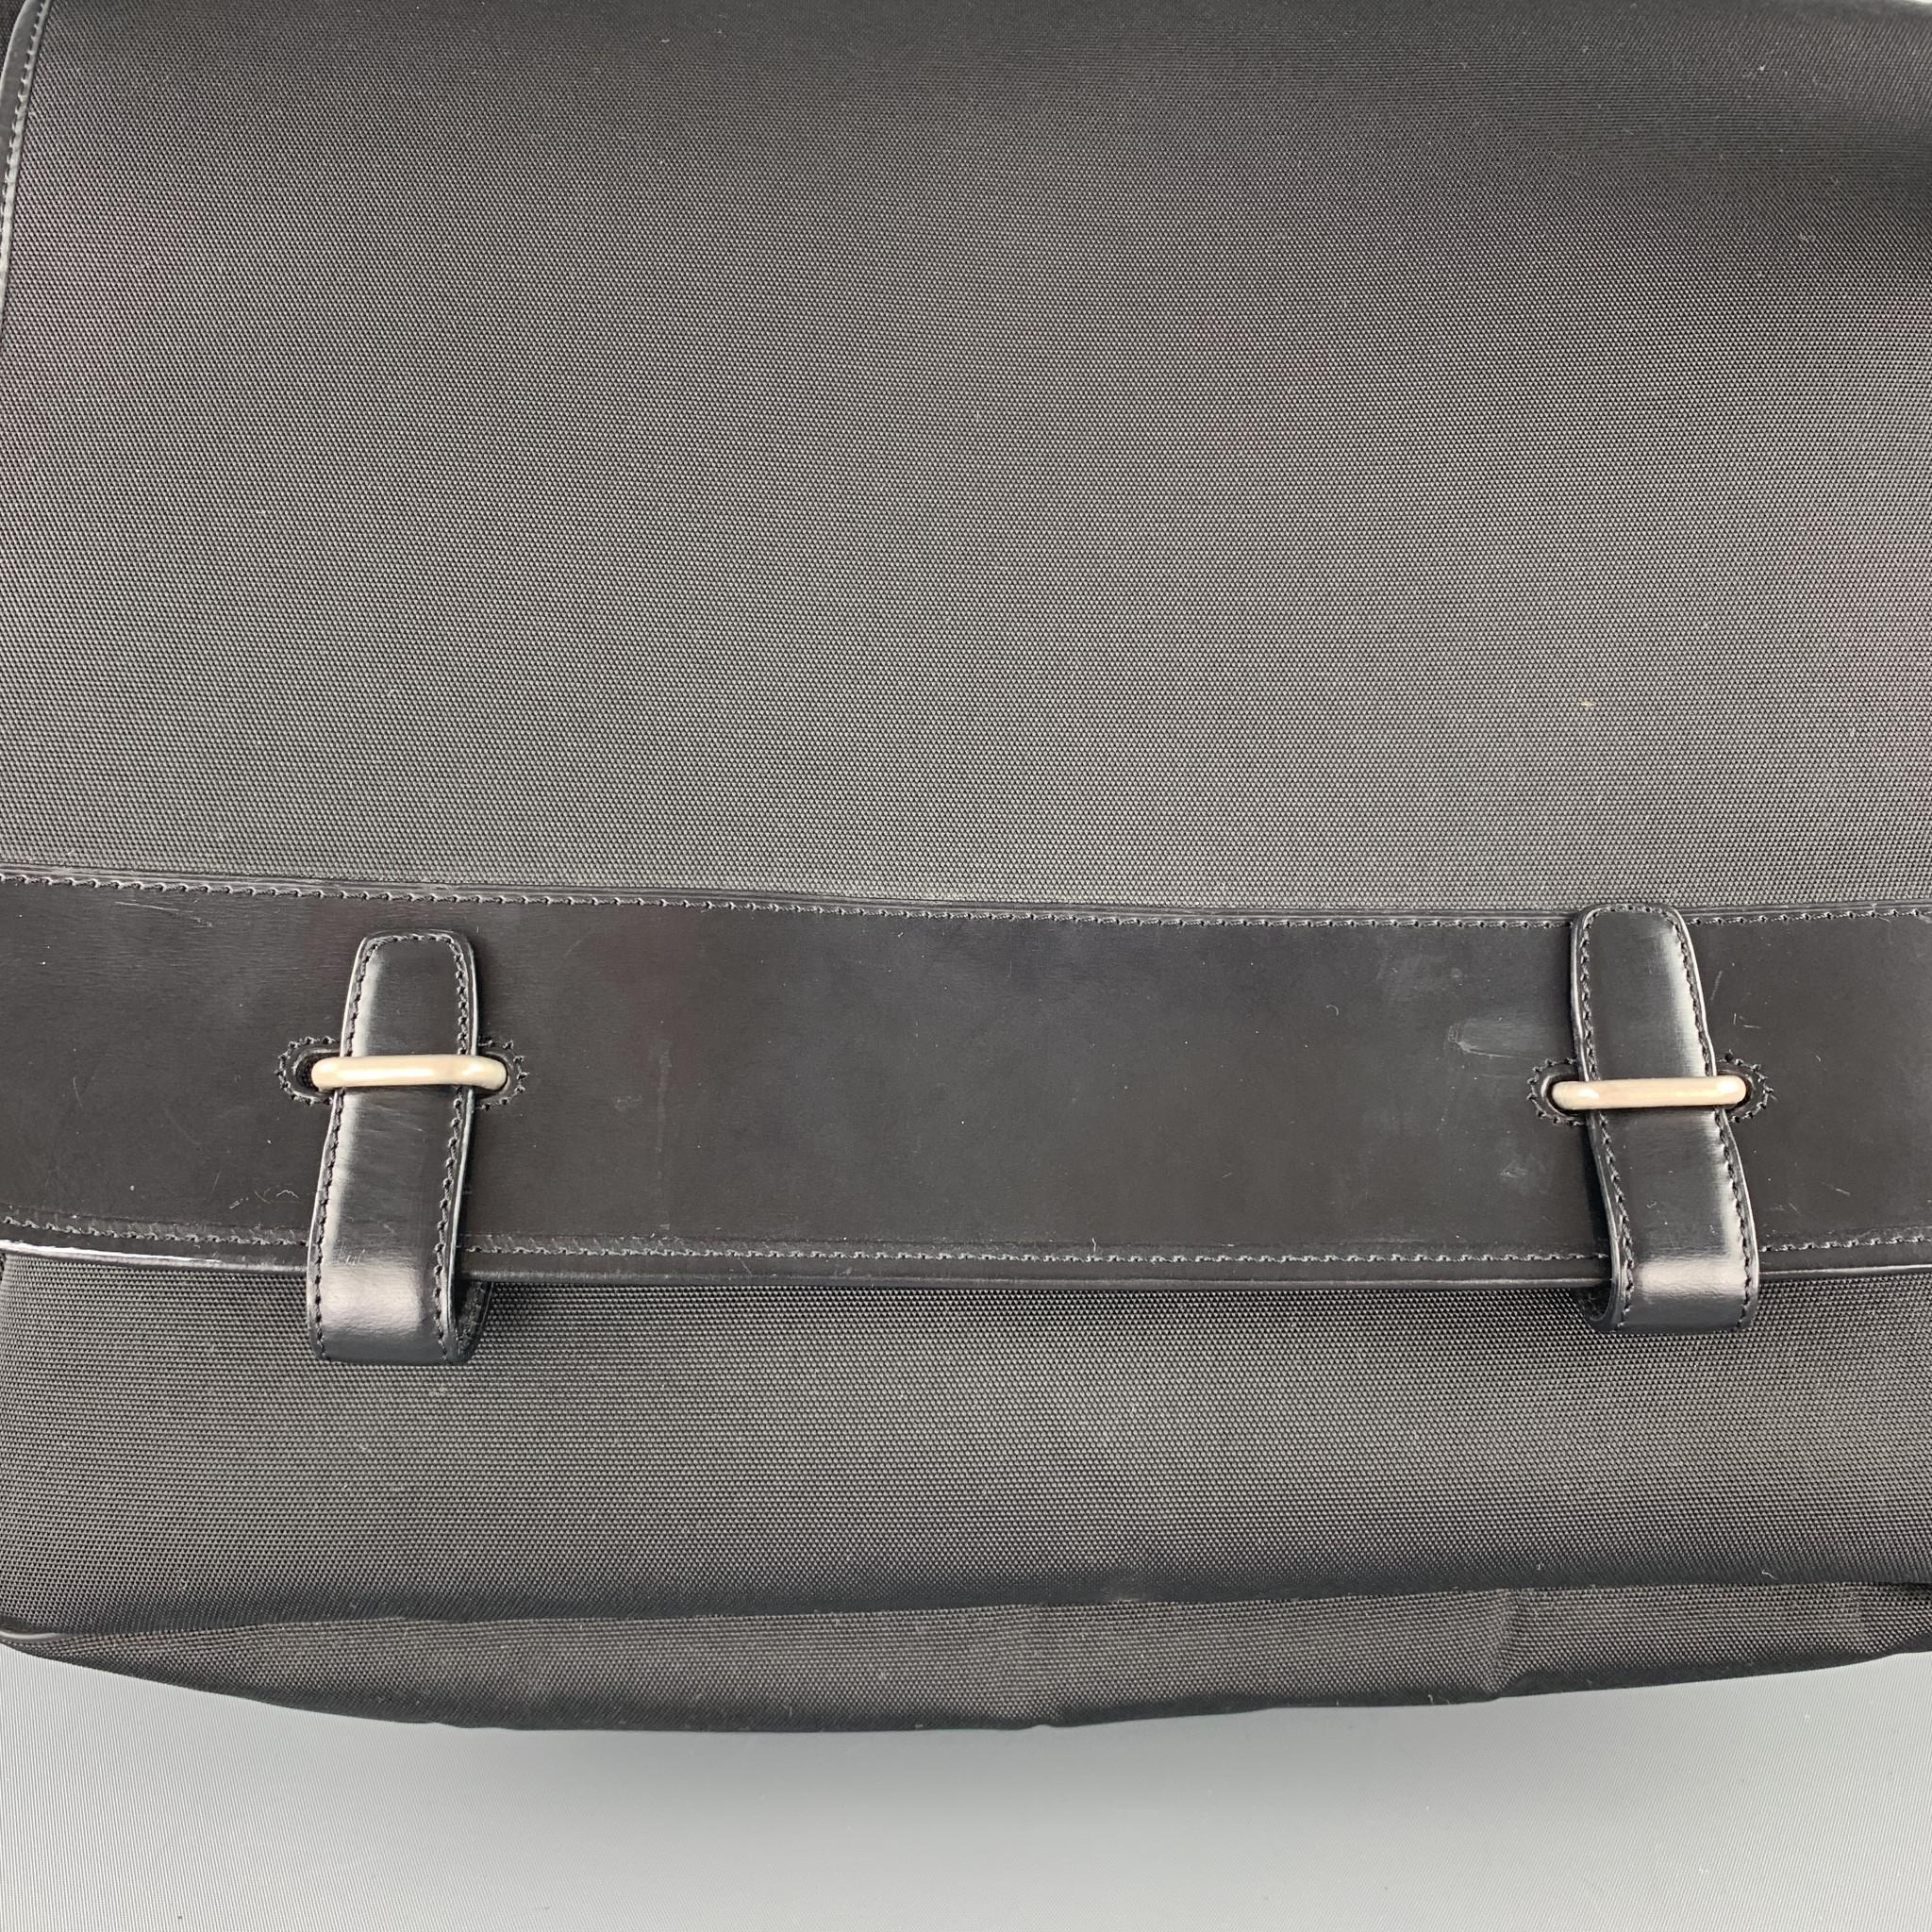 Vintage DUNHILL messenger bag comes in black nylon canvas with leather trim, side pockets, crossbody webbing strap with silver tone buckle, and top flap strap closures. 

Excellent Pre-Owned Condition.

Measurements:

Length: 13.5 in.
Width: 4.5